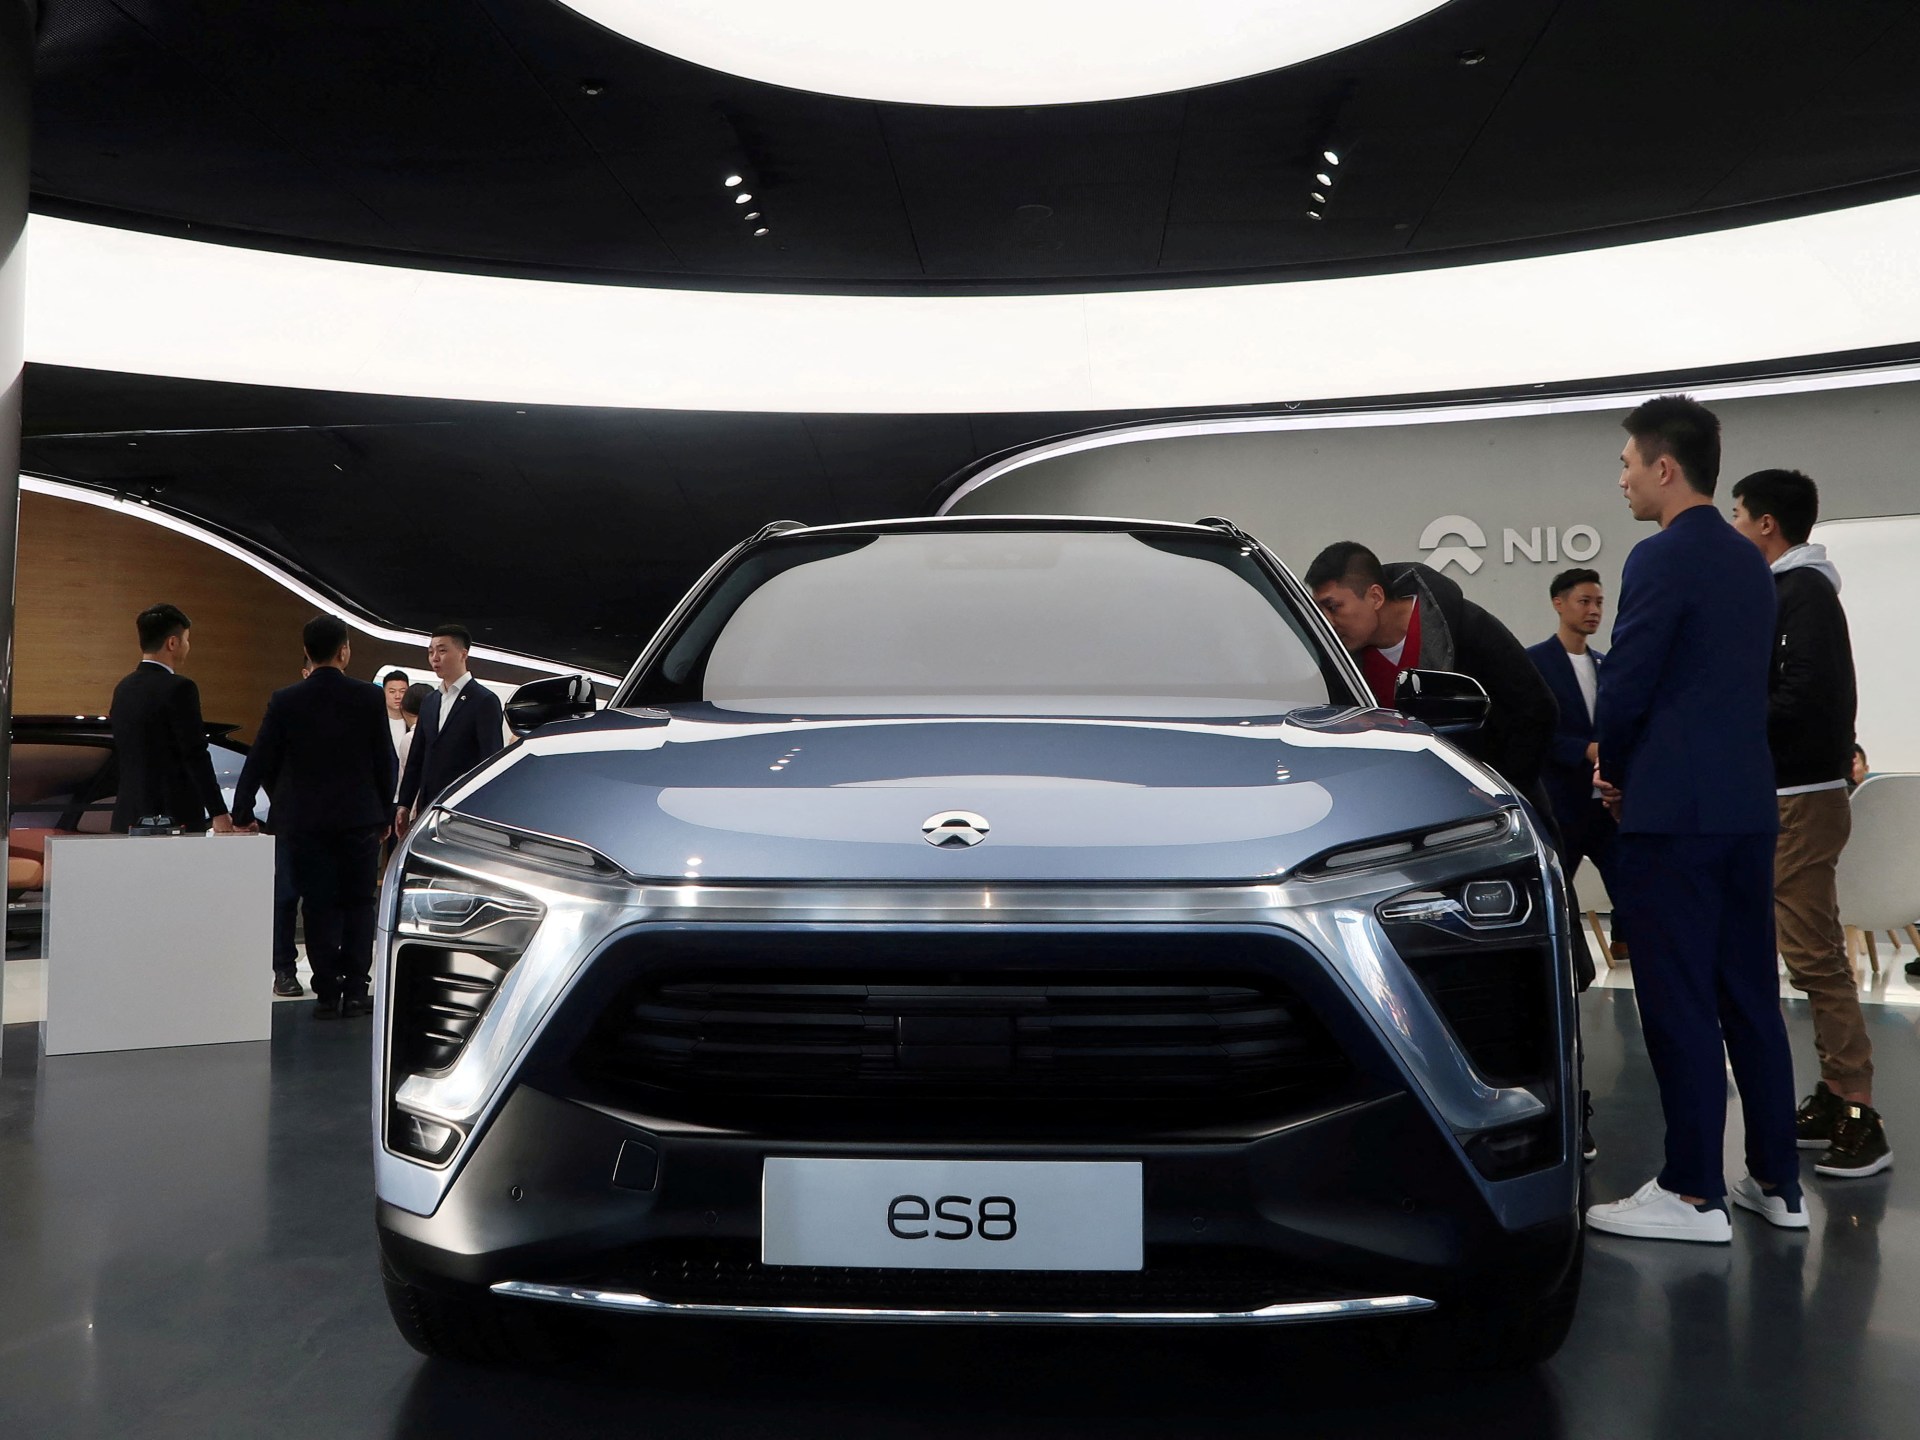 chinese-ev-maker-nio-resumes-production-after-covid-shutdown